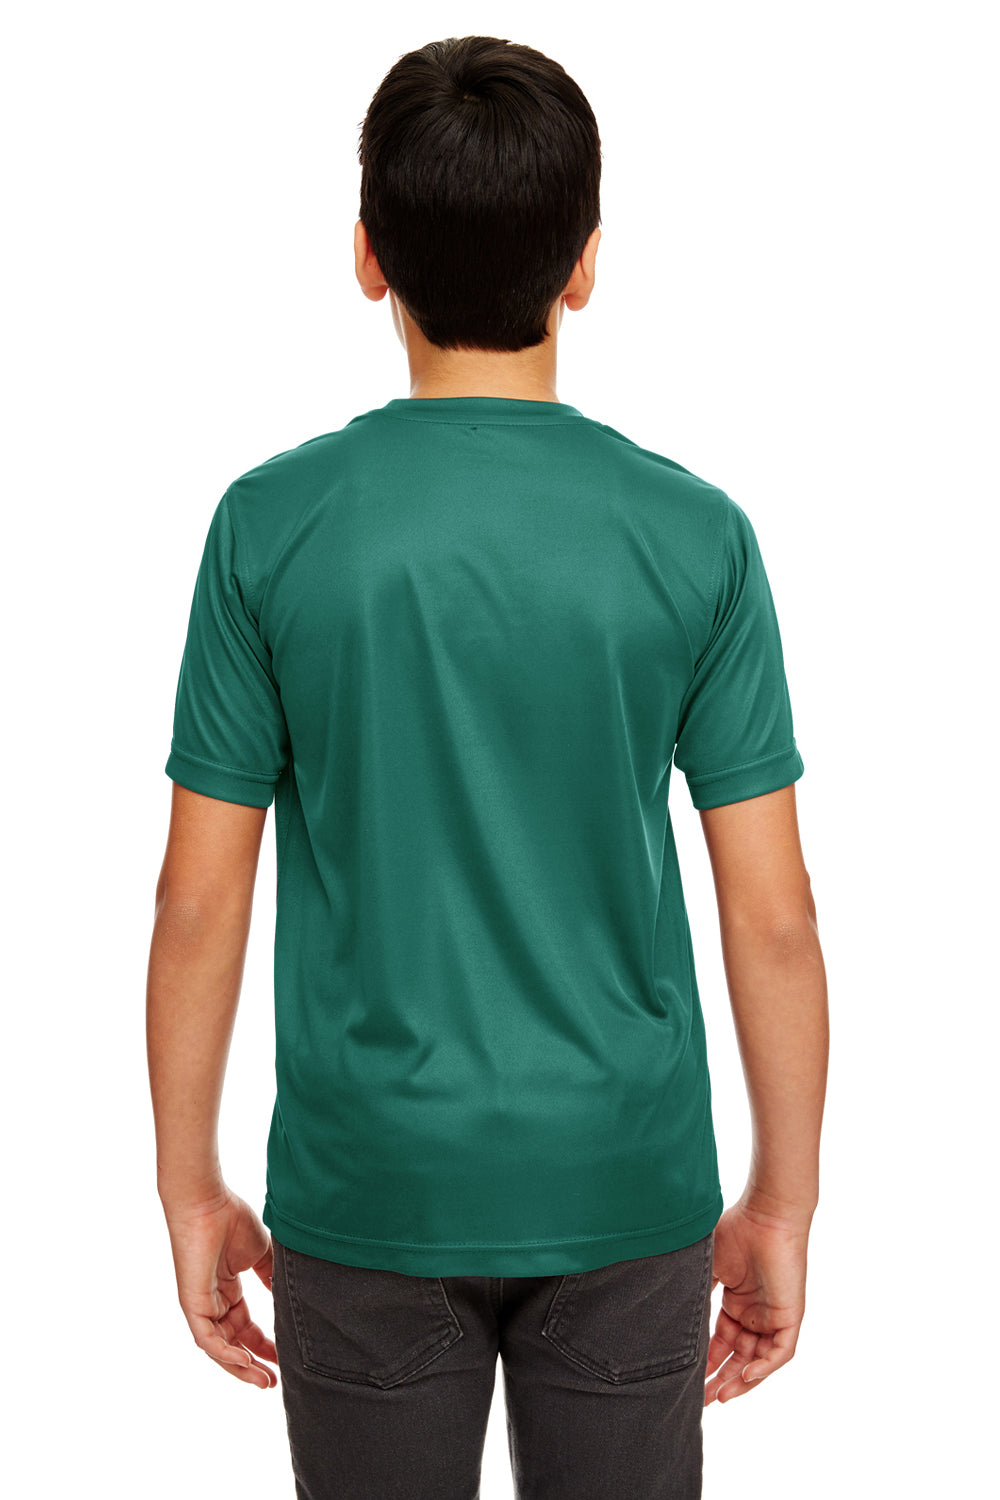 UltraClub 8420Y Youth Cool & Dry Performance Moisture Wicking Short Sleeve Crewneck T-Shirt Forest Green Back